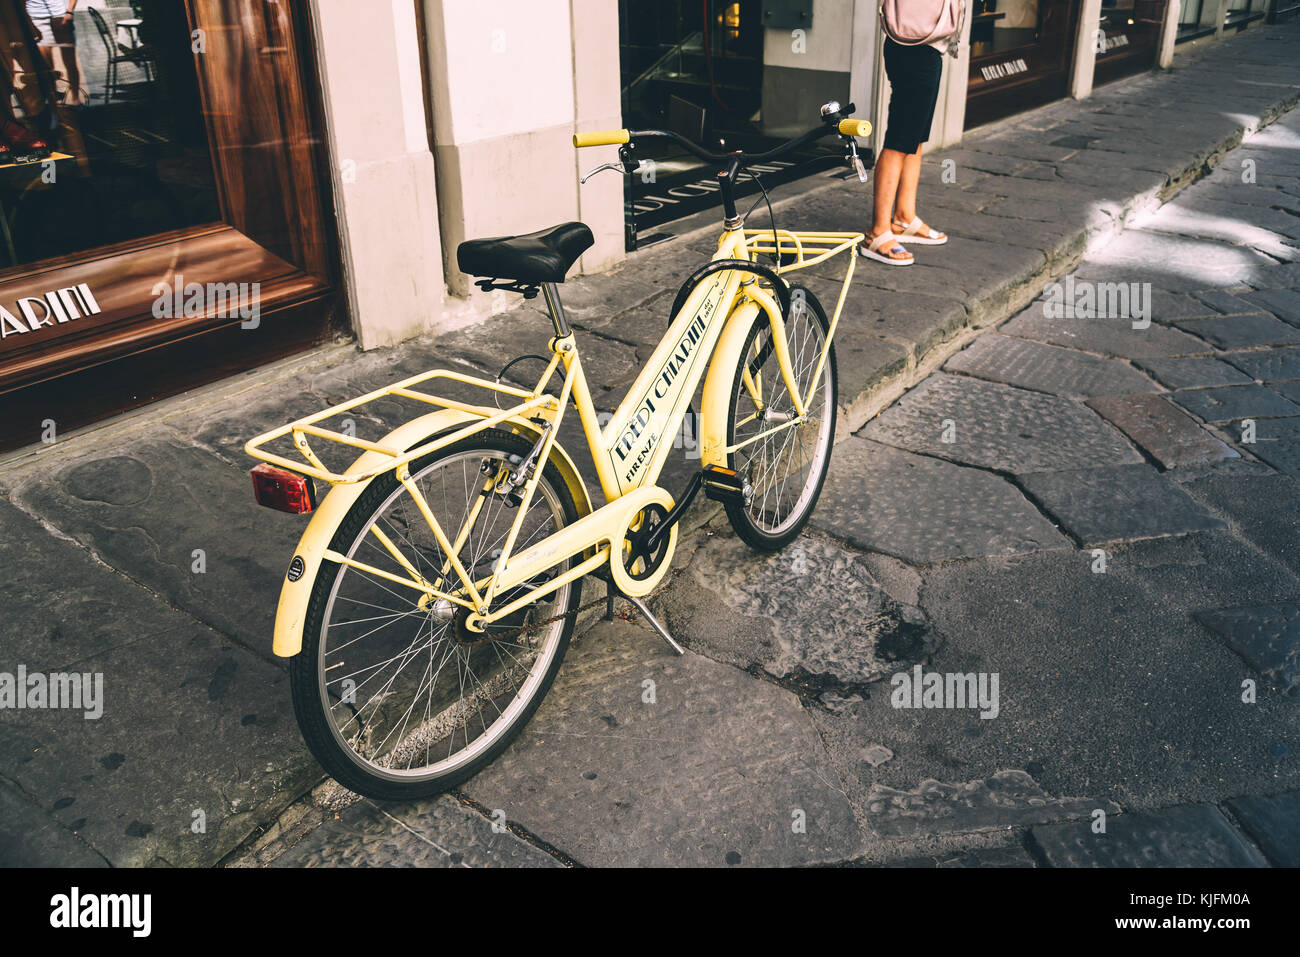 Bicycle Parked By Store In City Stock Photo